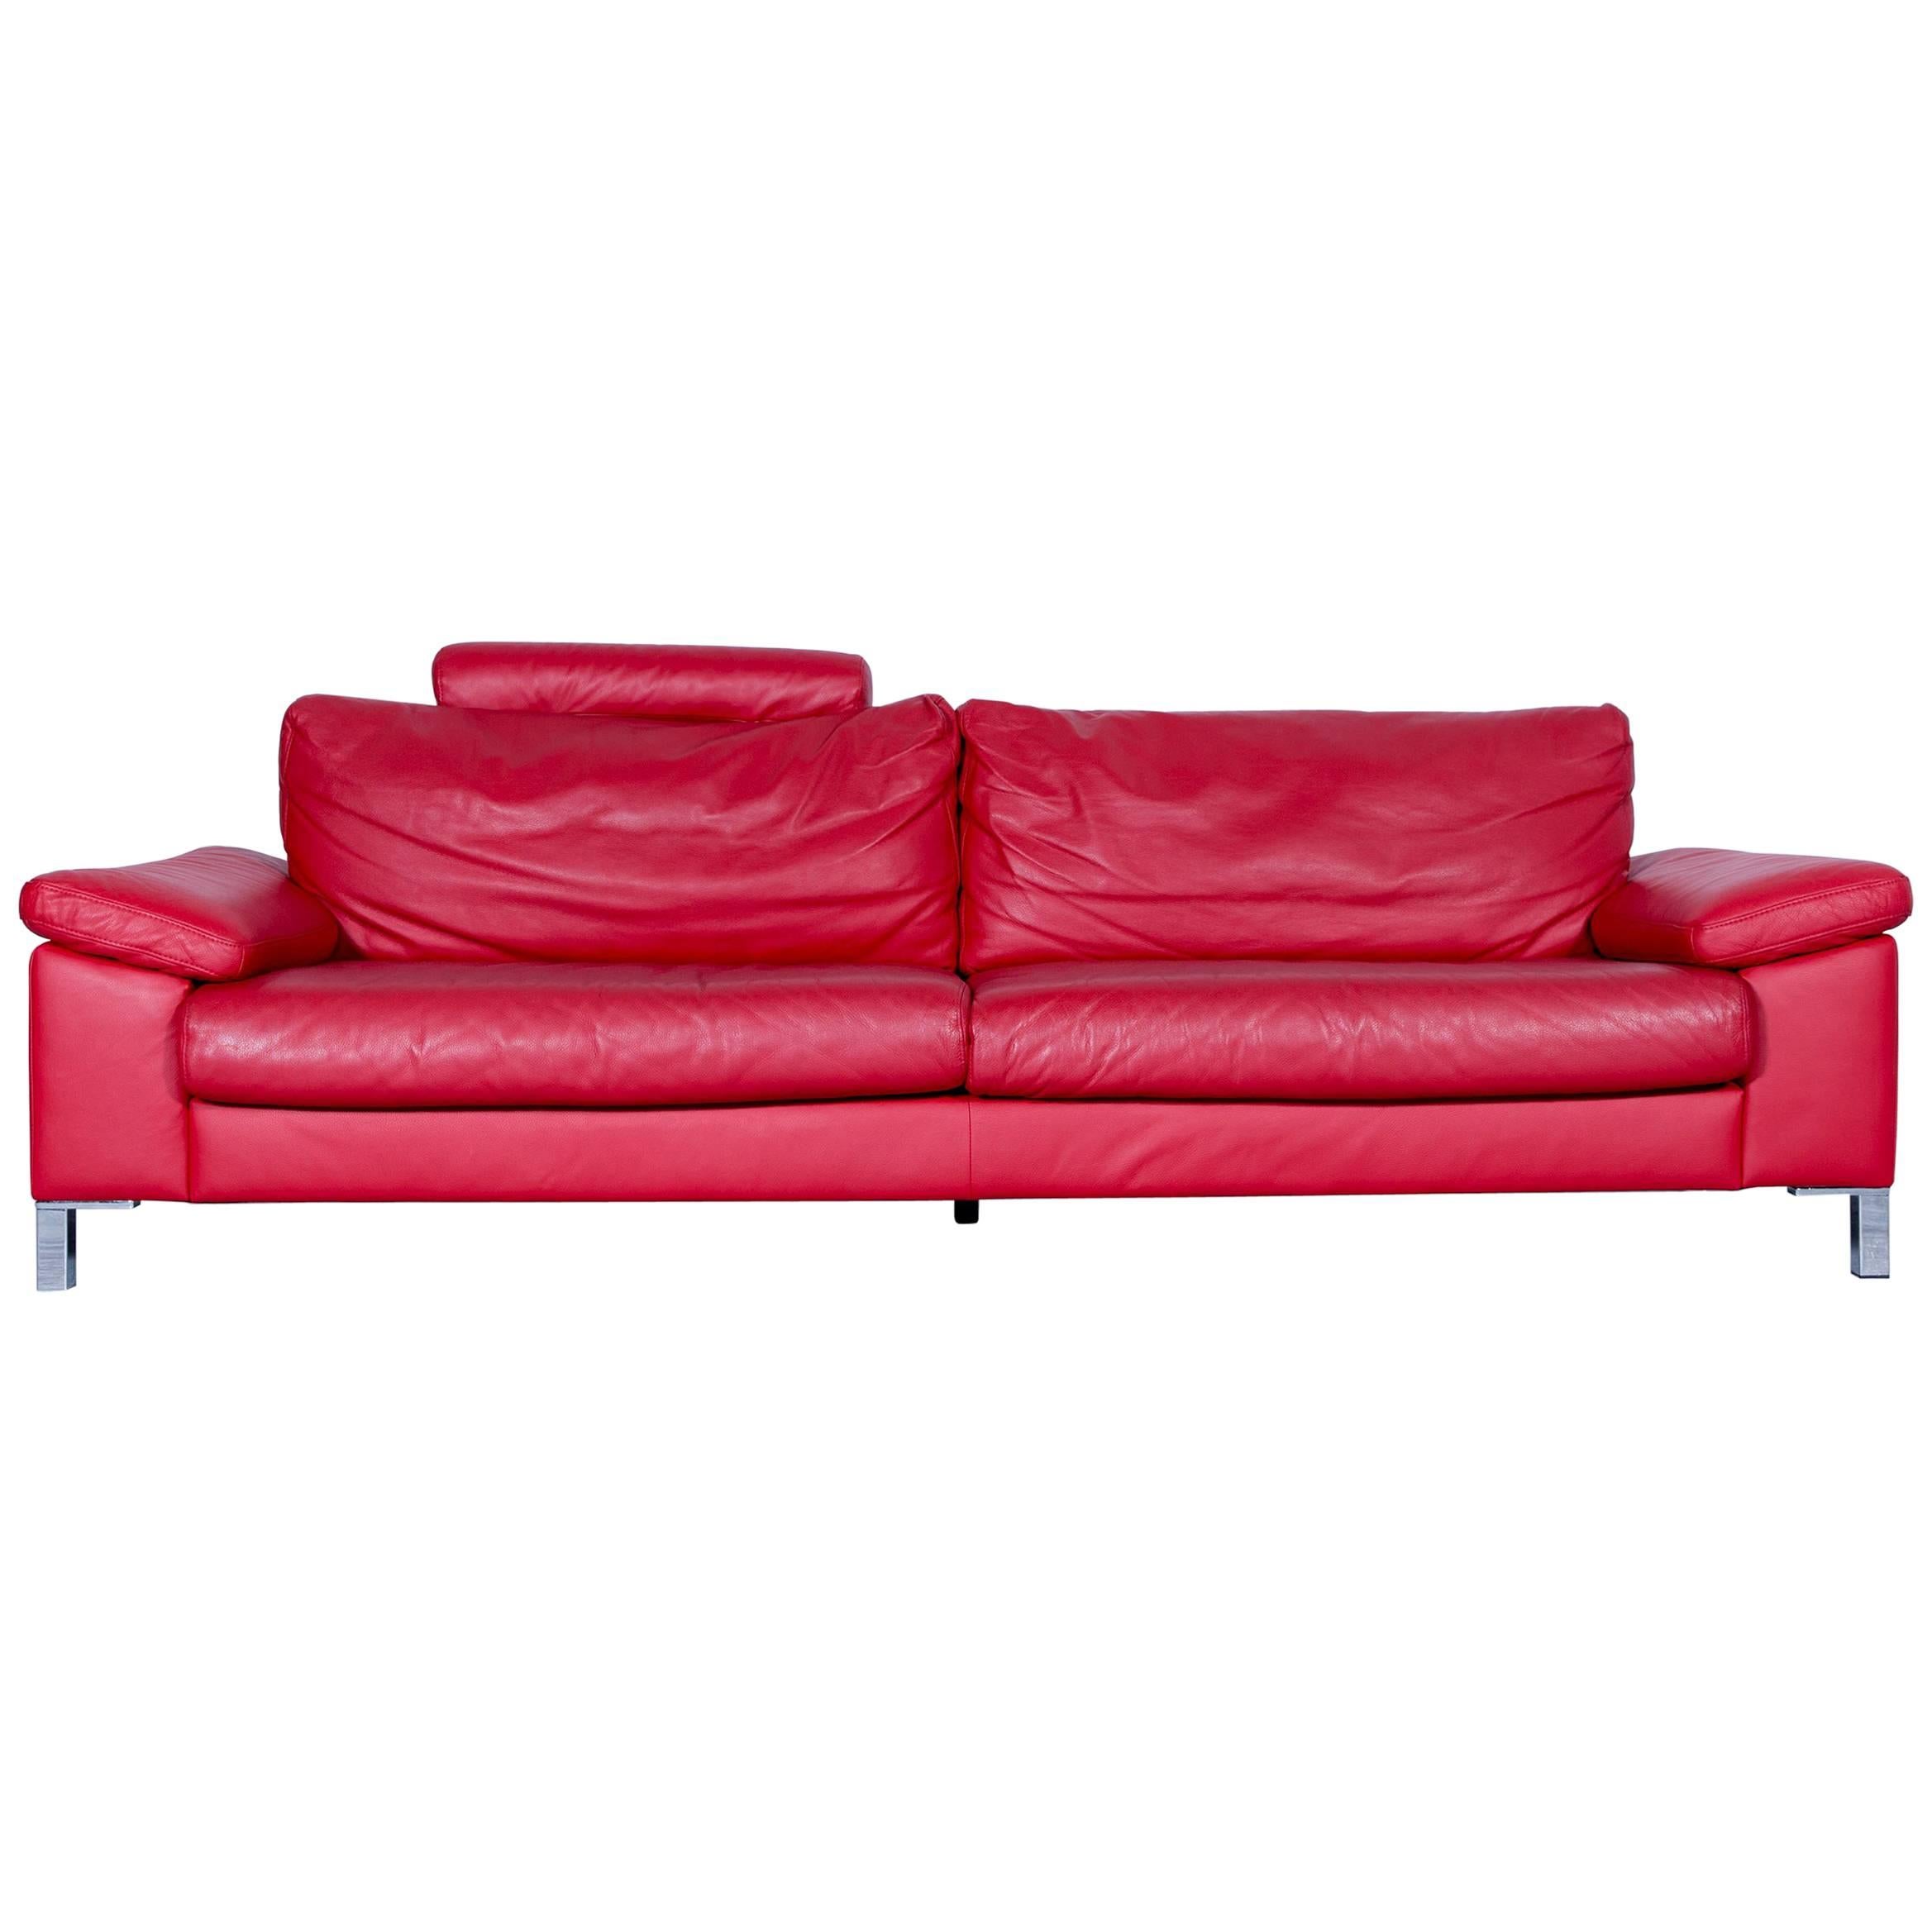 Designer Sofa Red Three-Seat Leather Modern Couch Head Rest